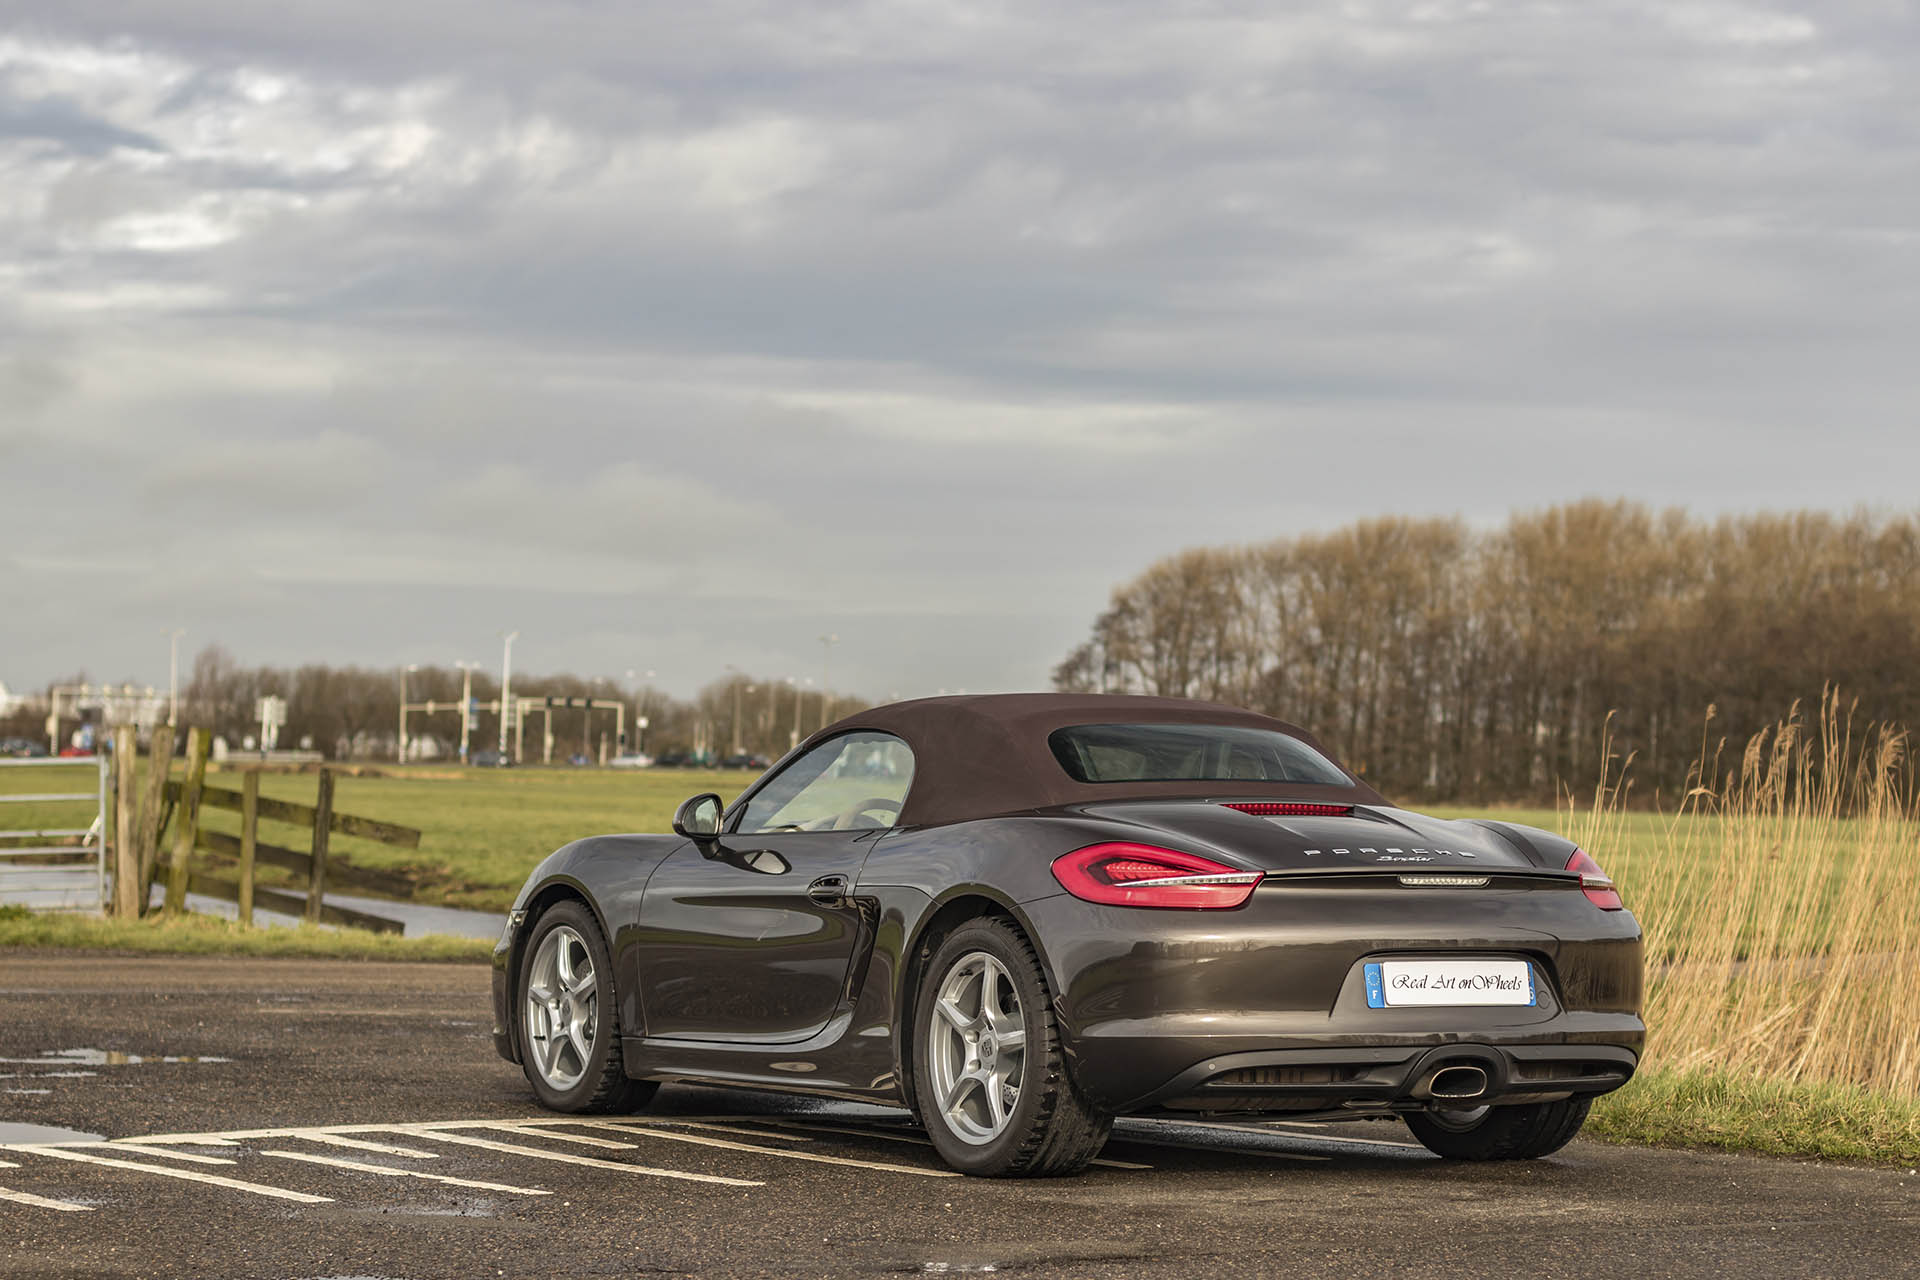 Real Art On Wheels | The Collection - Porsche Boxster